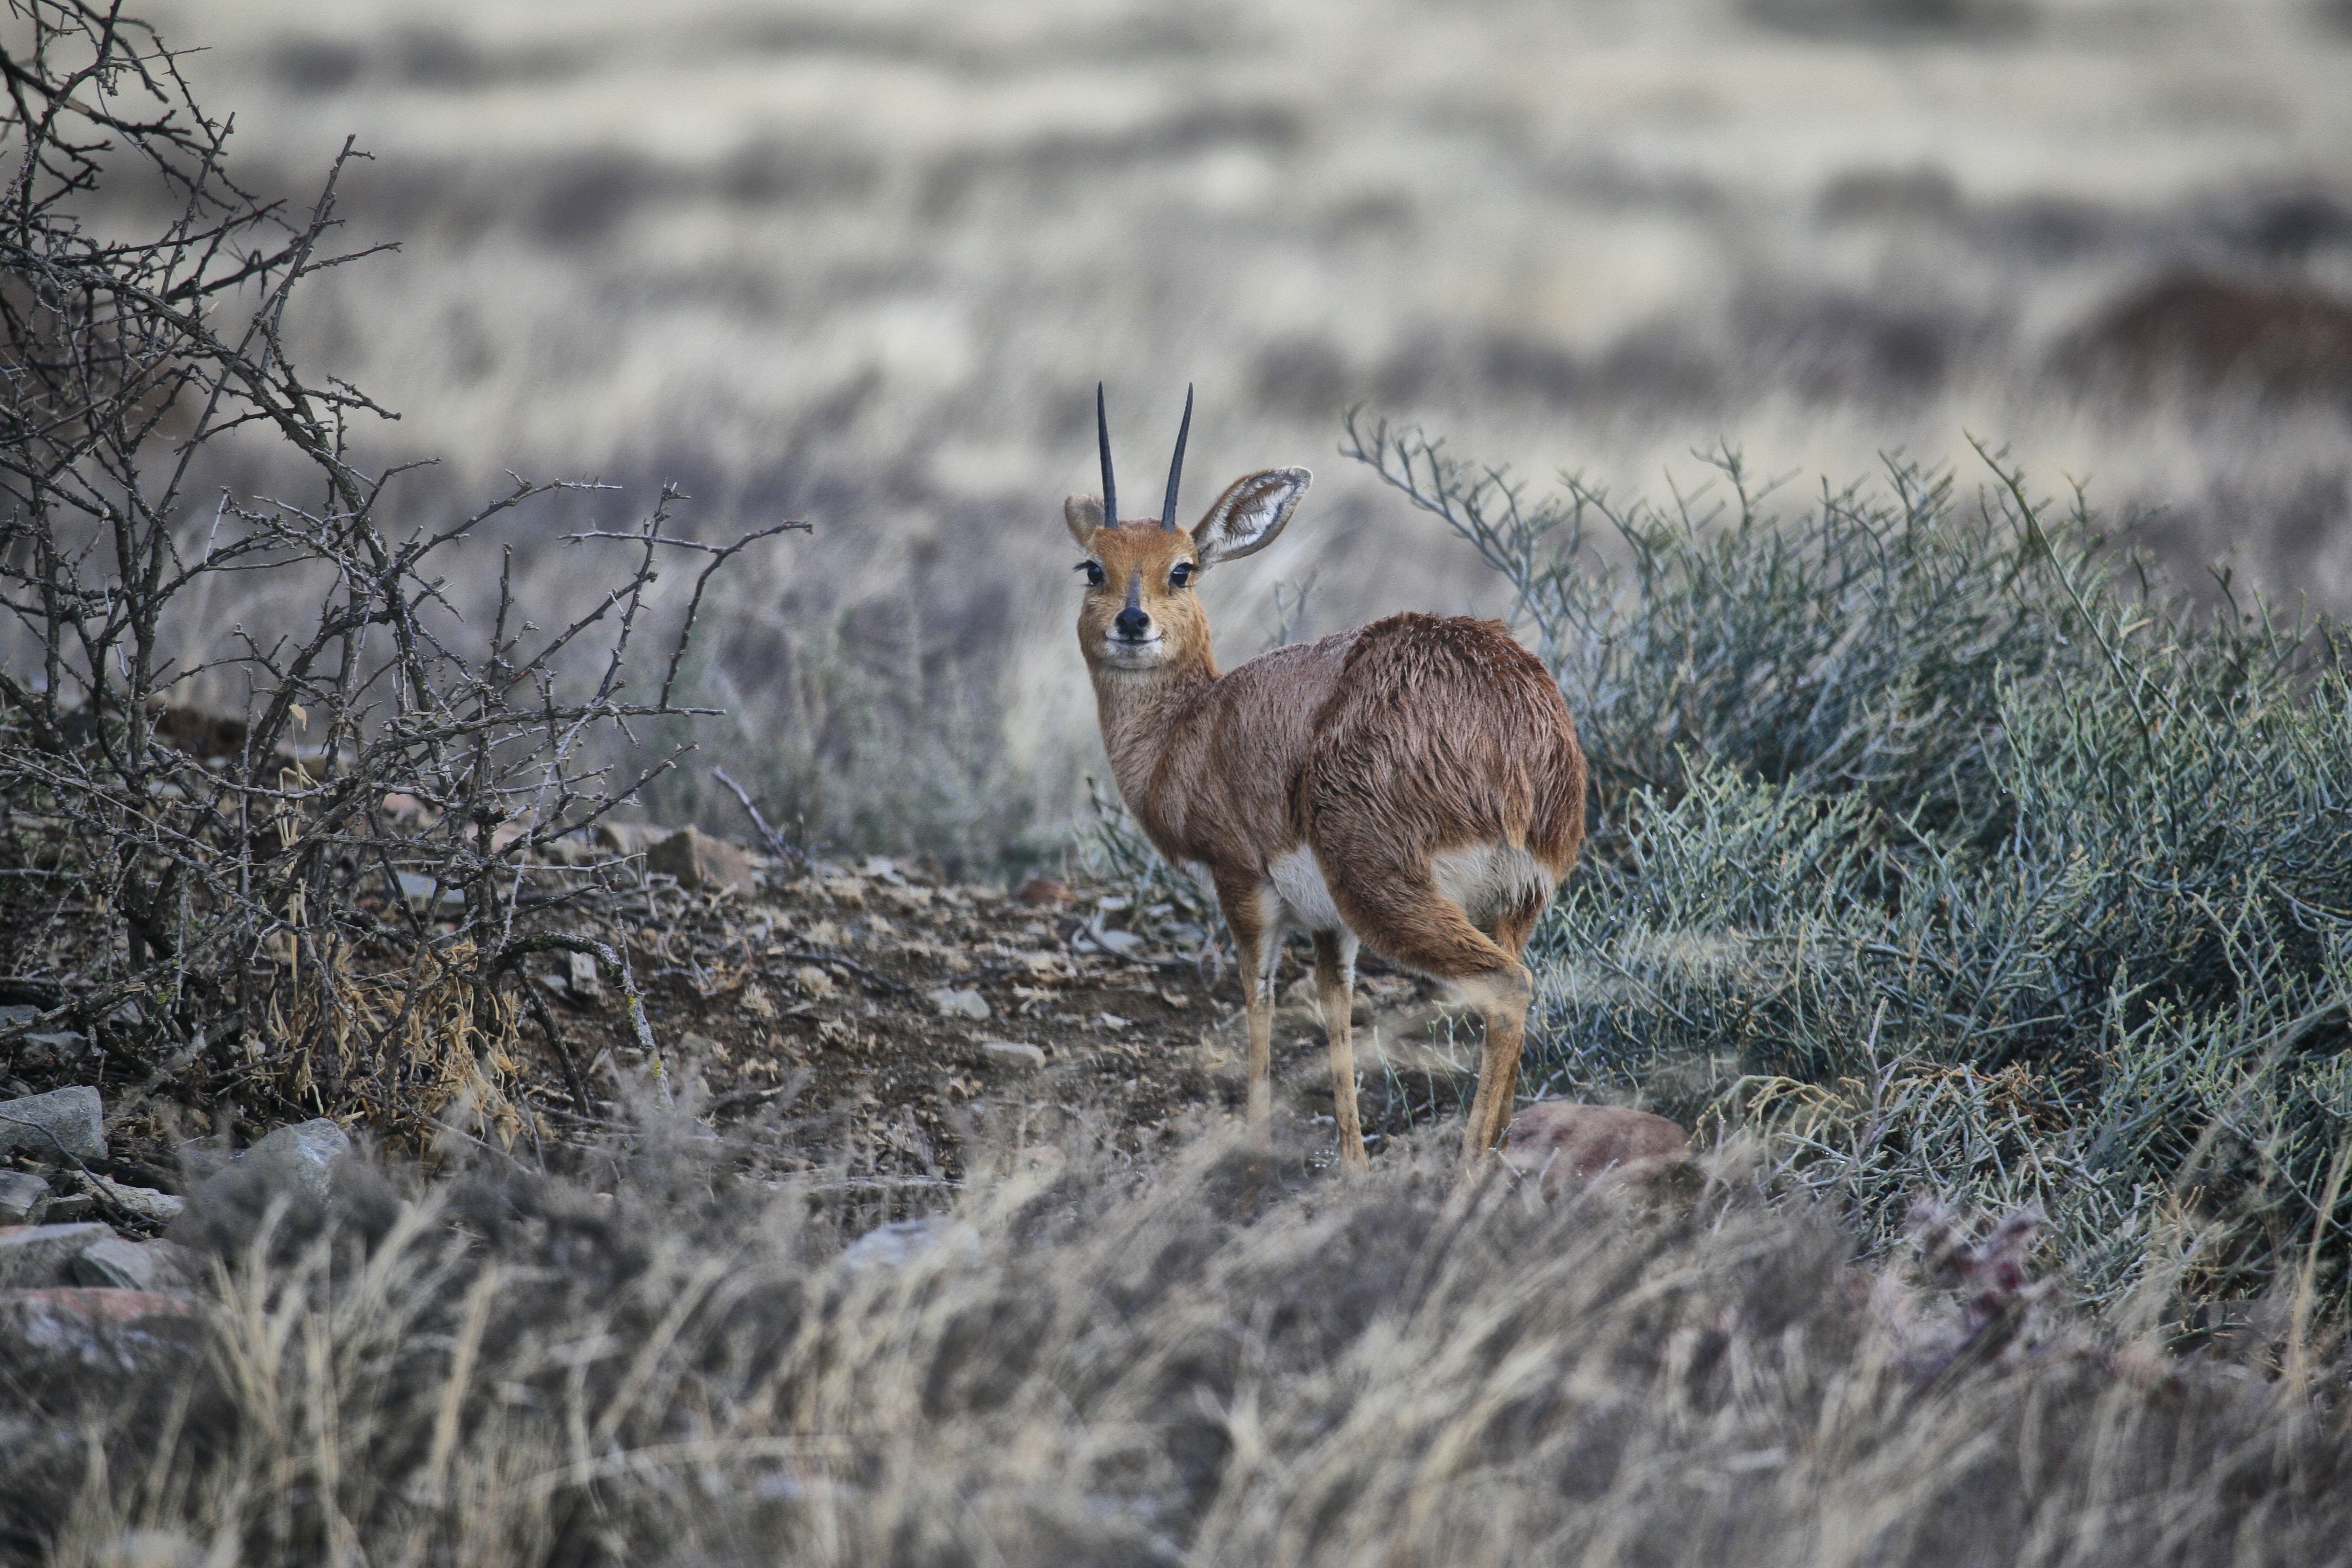 An adorable little steenbok, one of the smallest members of the antelope tribe. 